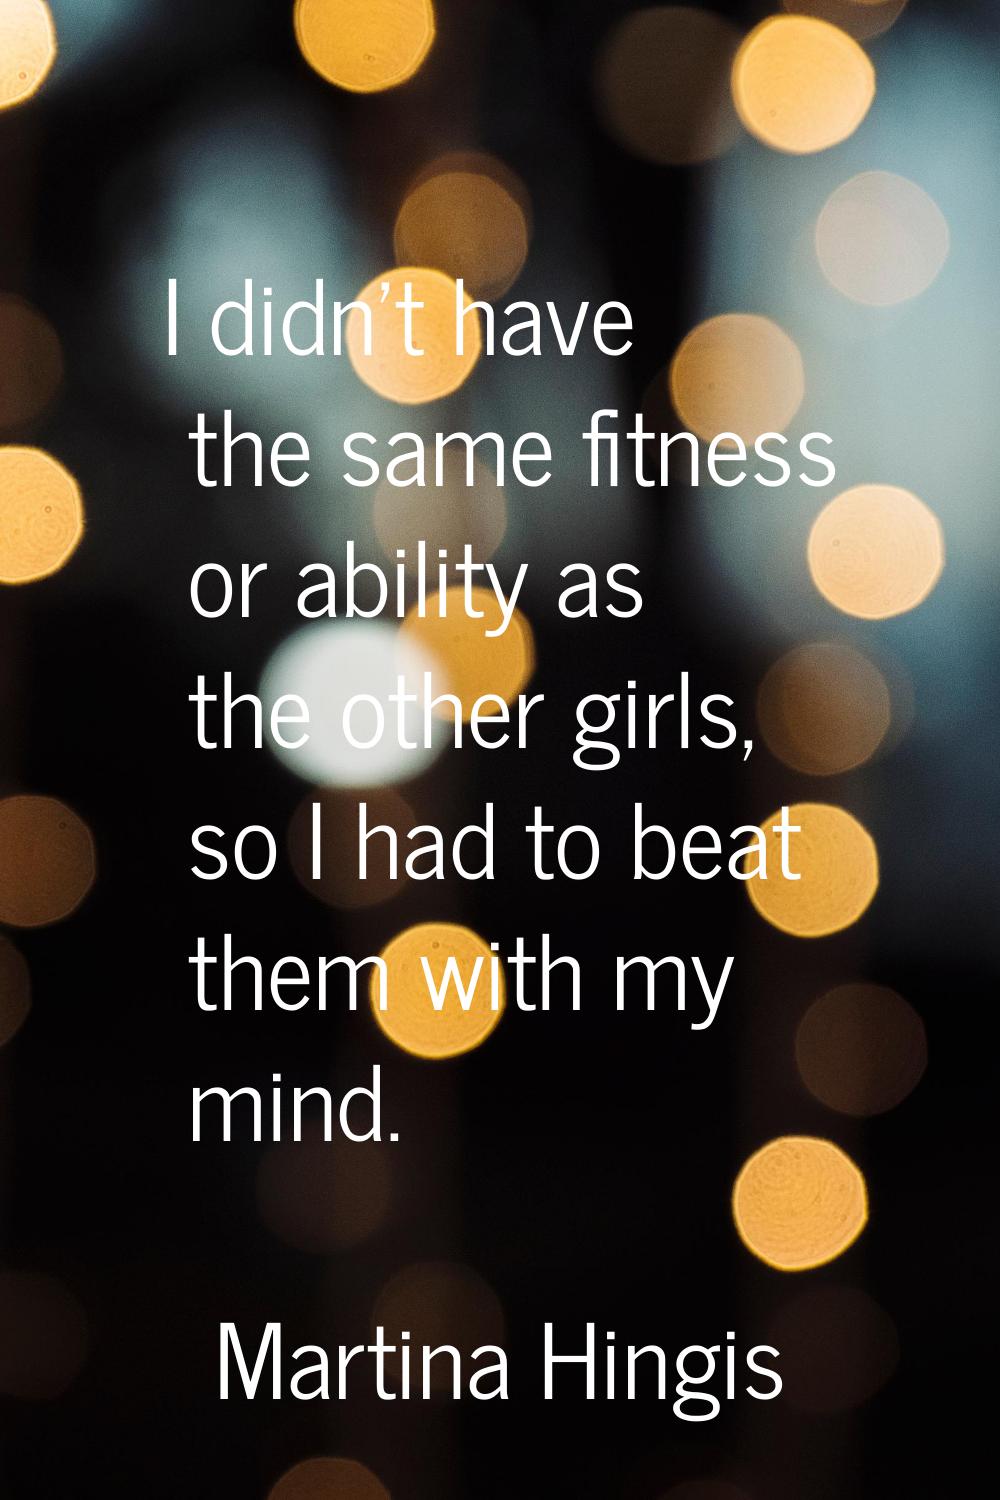 I didn't have the same fitness or ability as the other girls, so I had to beat them with my mind.